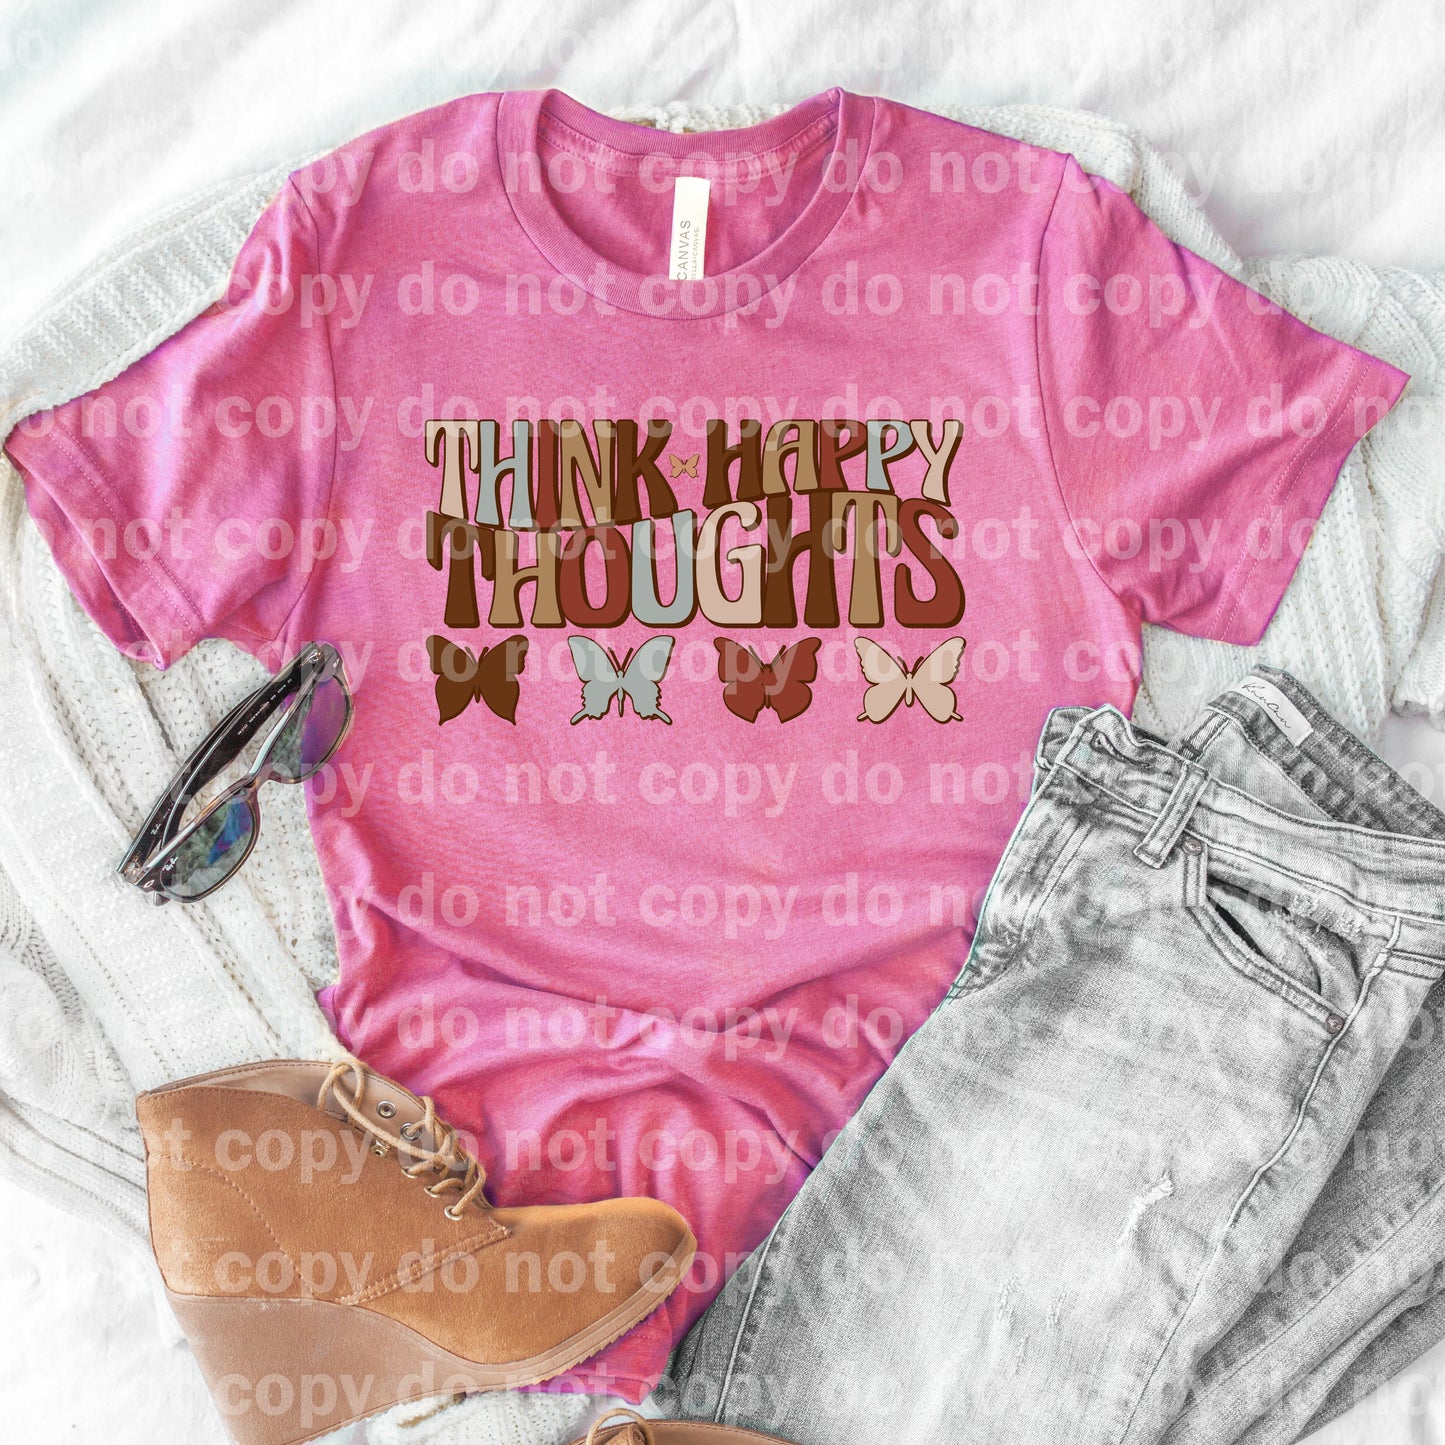 Think Happy Thoughts Dream Print or Sublimation Print